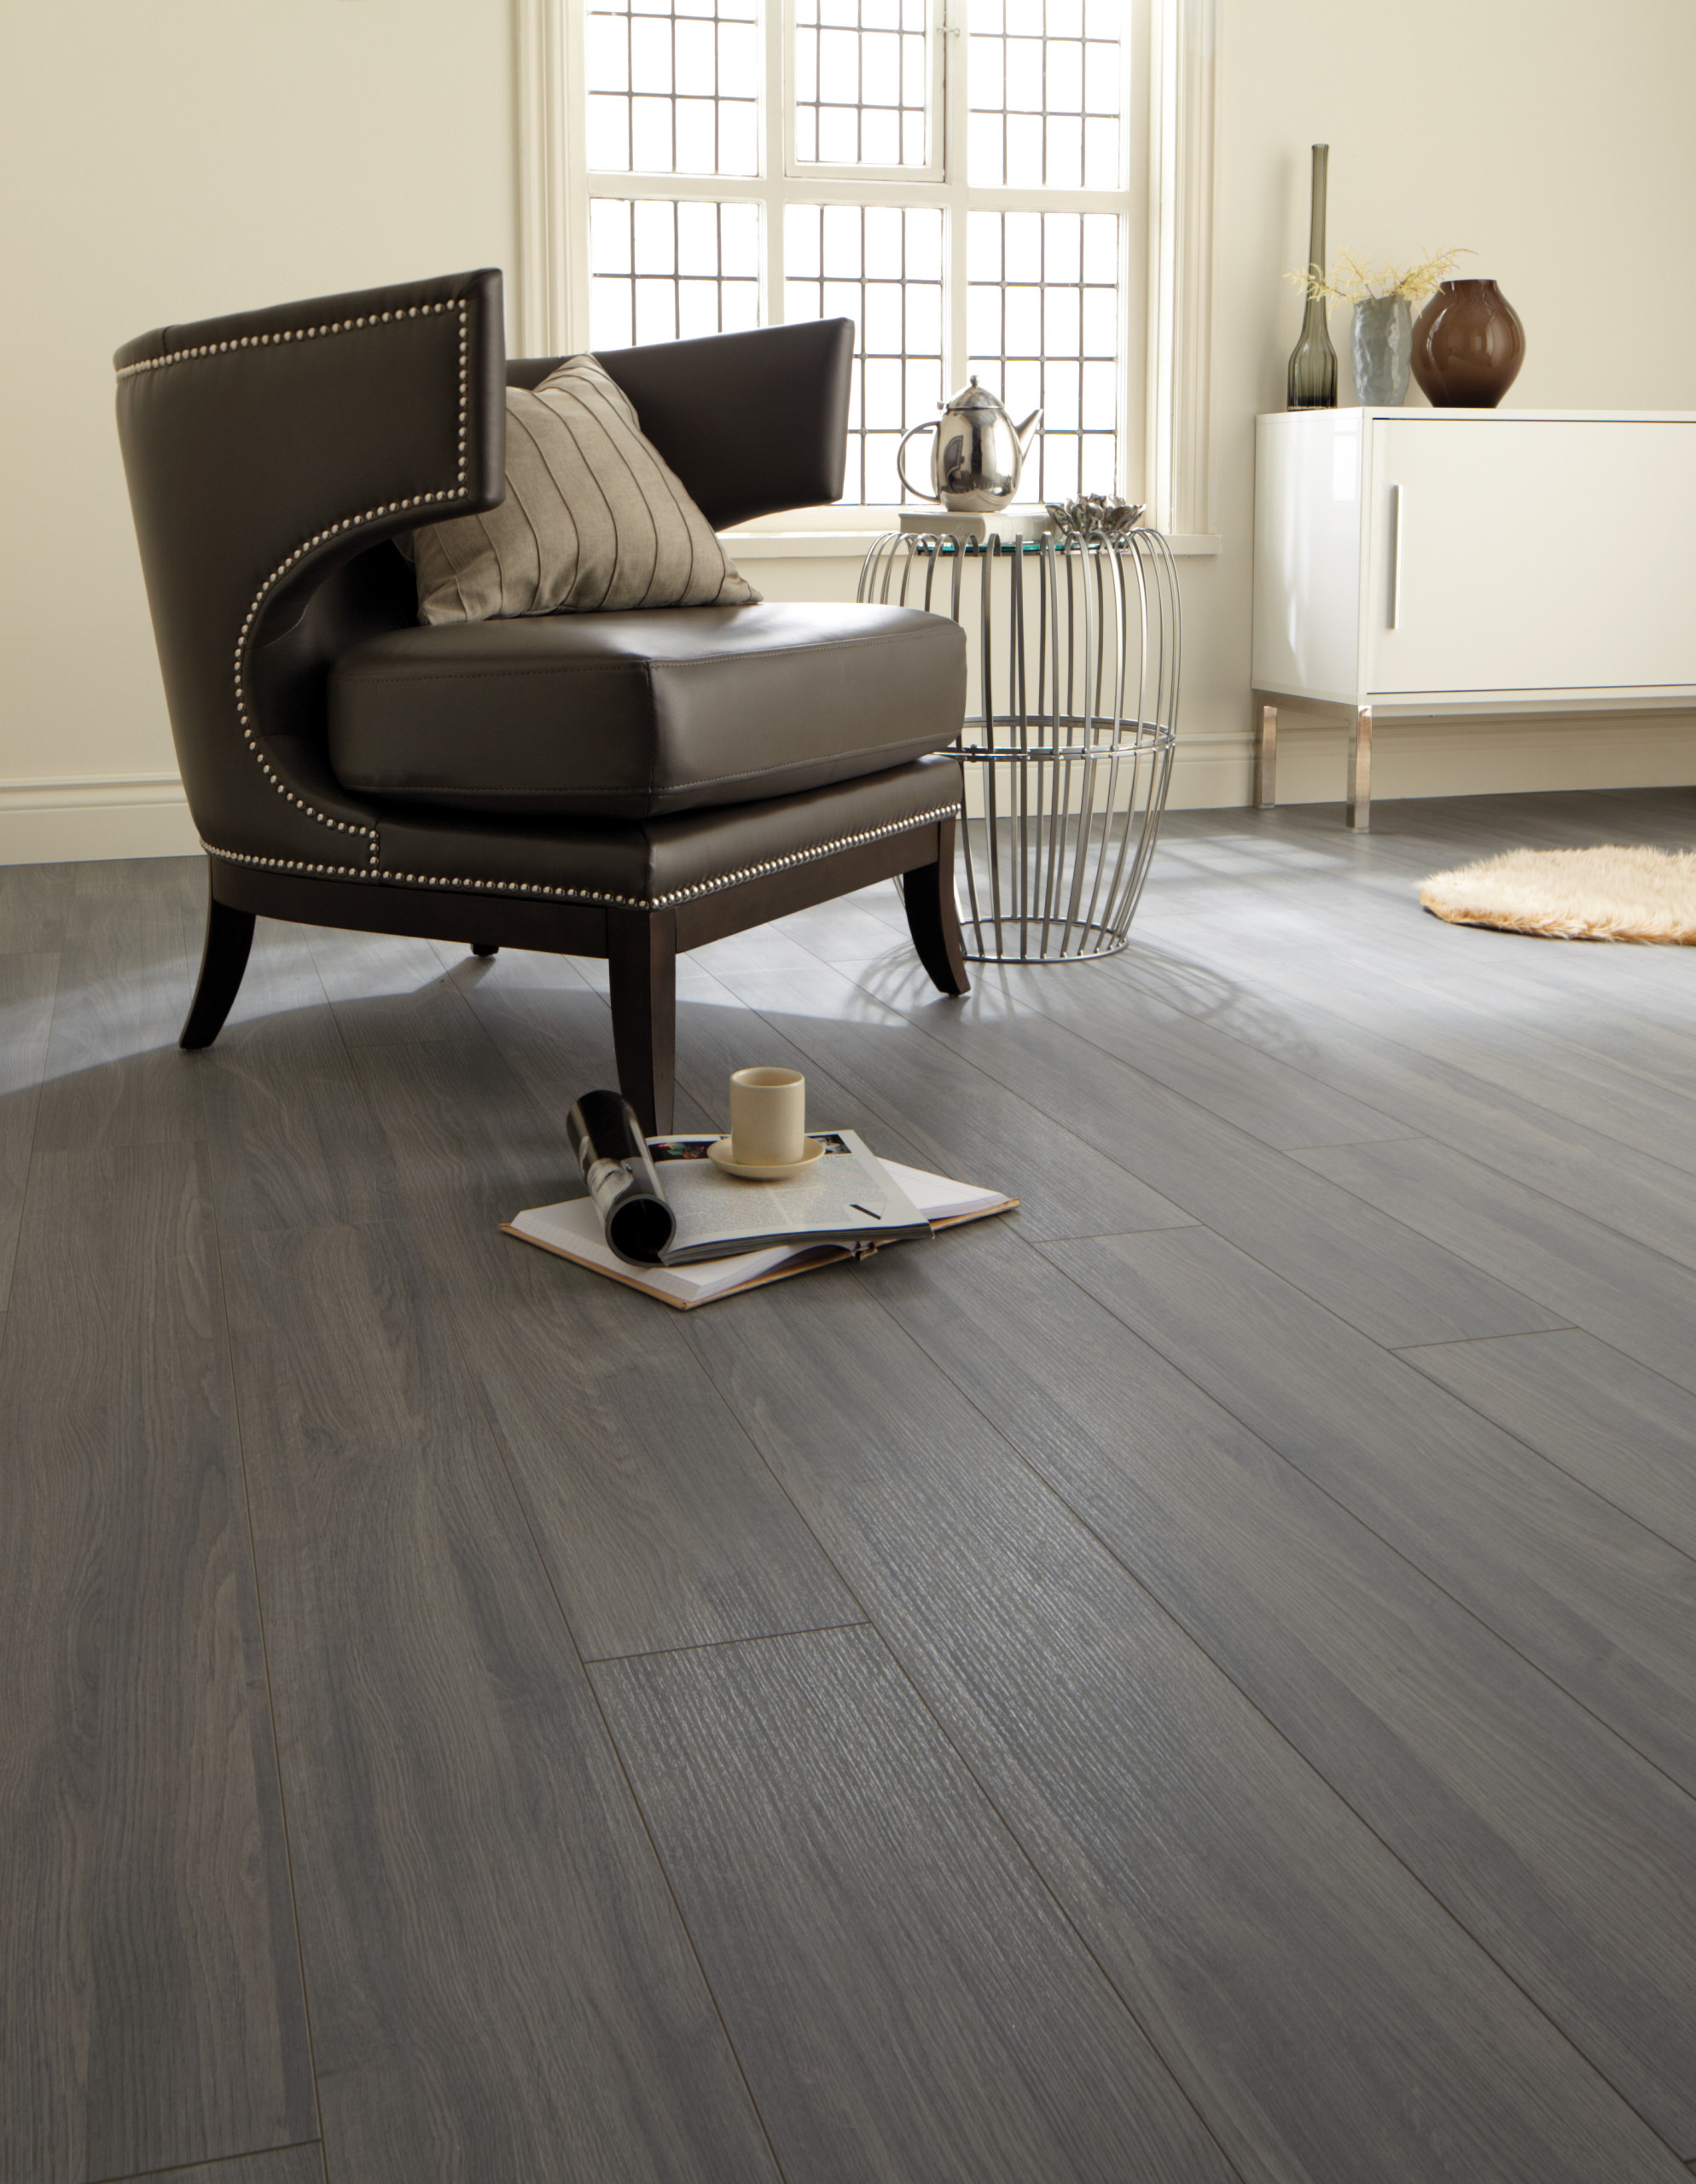 reclaimé™ french country oak planks